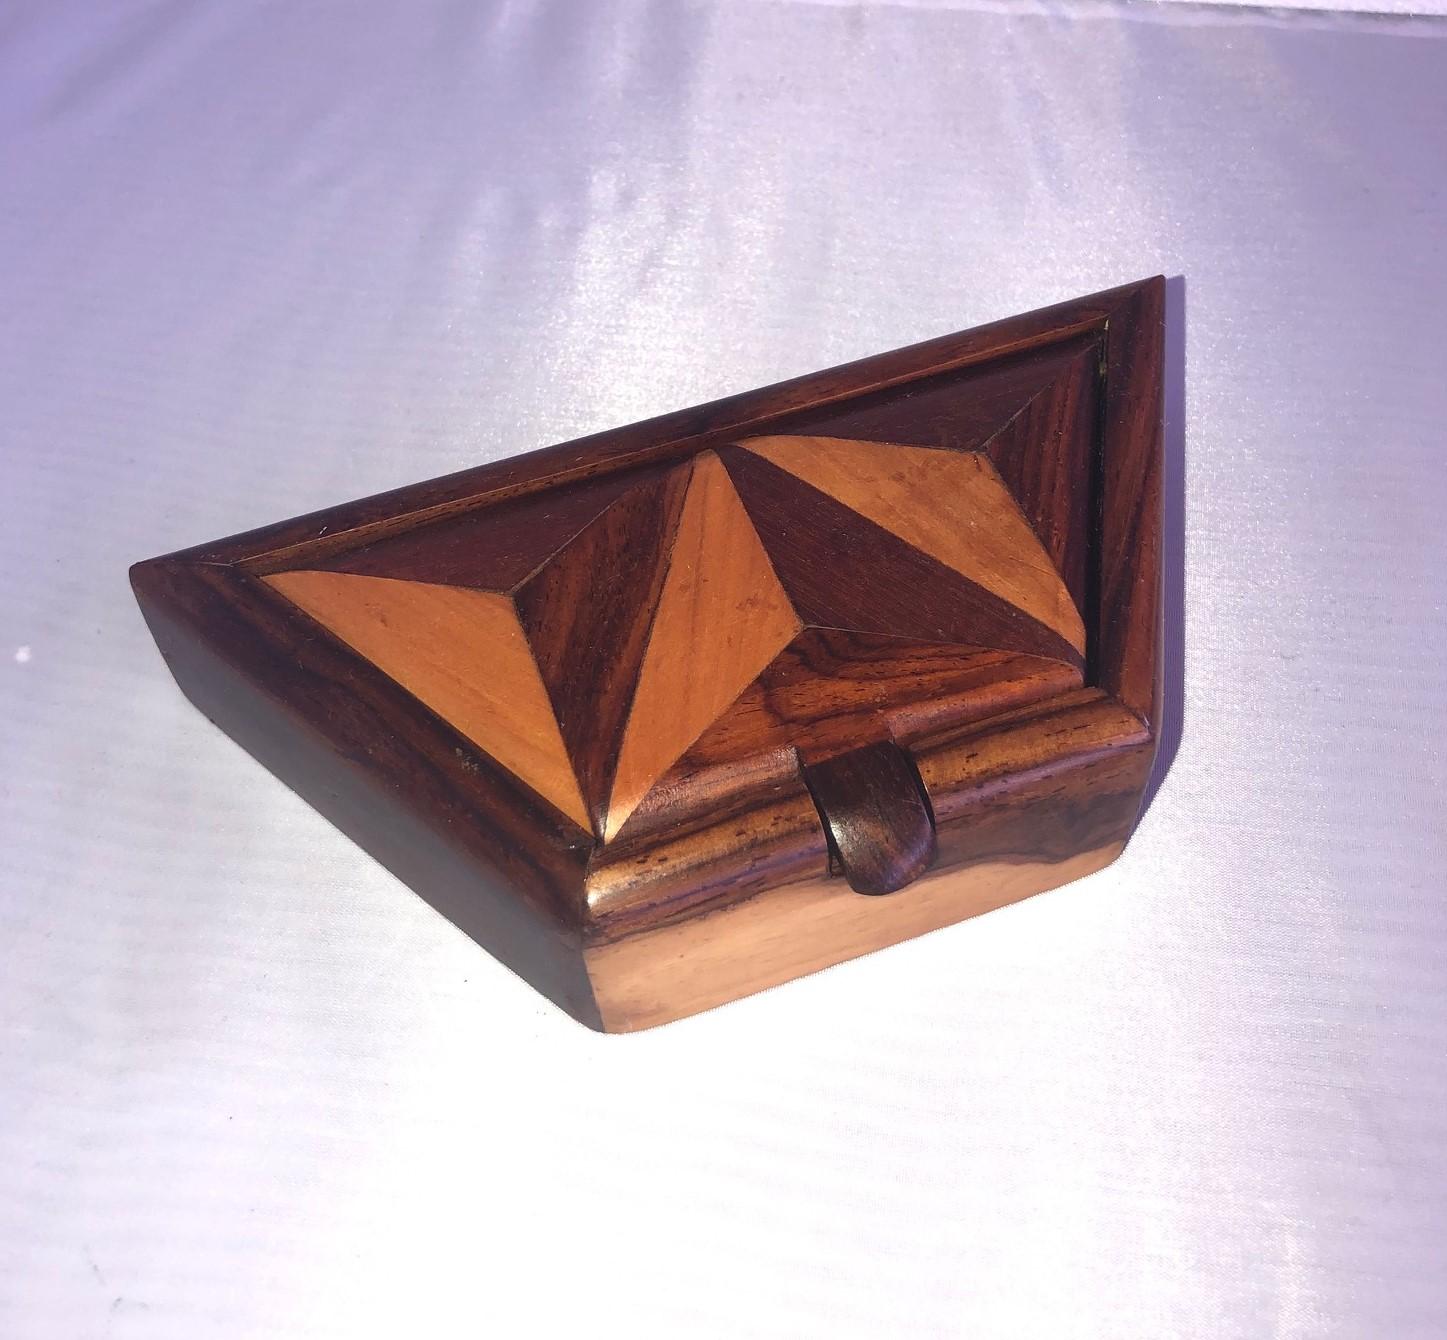 Beautiful and unique handcrafted trinket box made of inlaid mixed woods (mahogany, walnut, burl wood, rosewood and maple), circa 1970s. The piece has a trapezoid shape and a attached lid that rotates up to open. The bottom of the box is felt lined. 